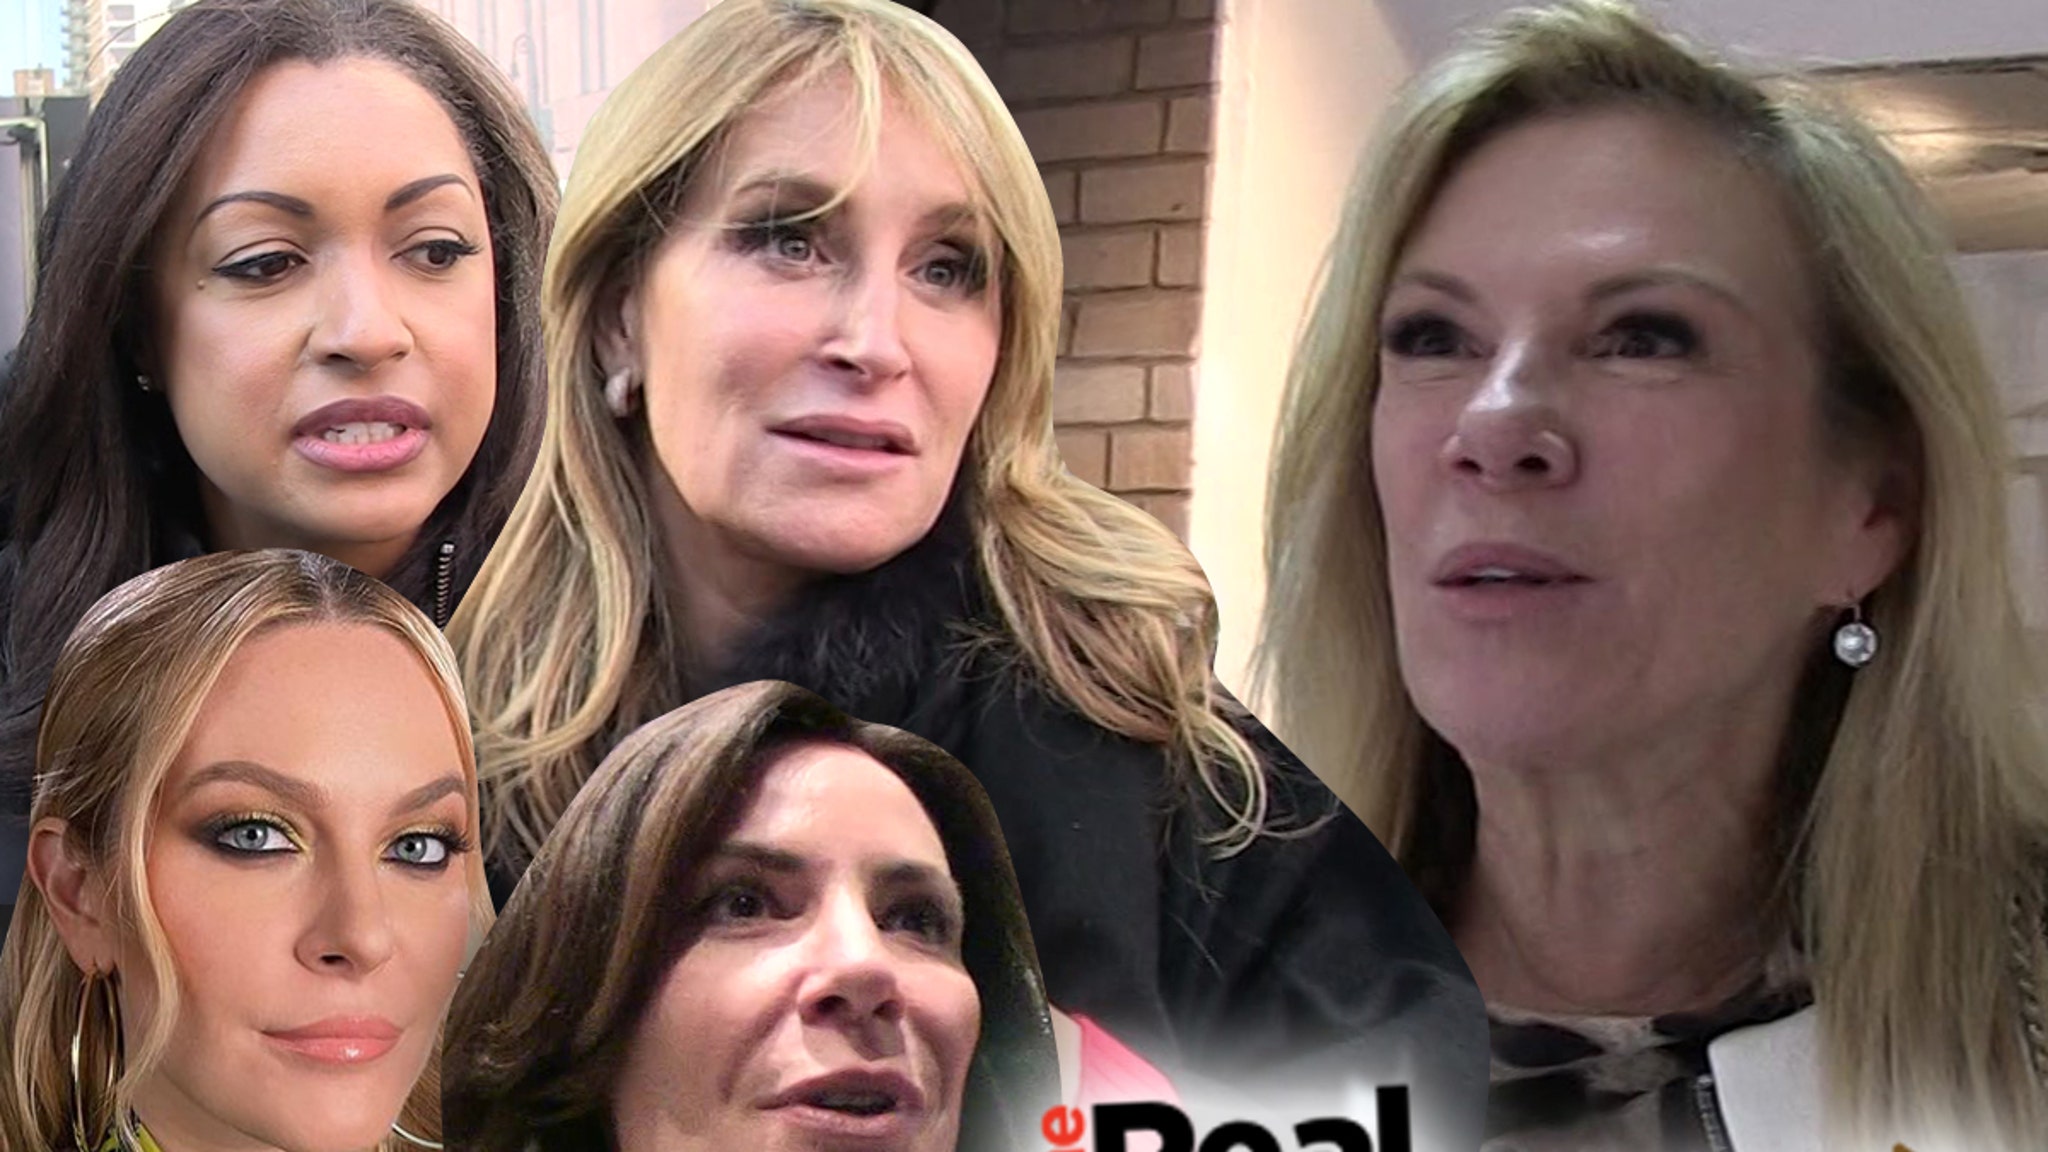 ‘RHONY’ annoyed by Ramona Singer for COVID’s reckless behavior